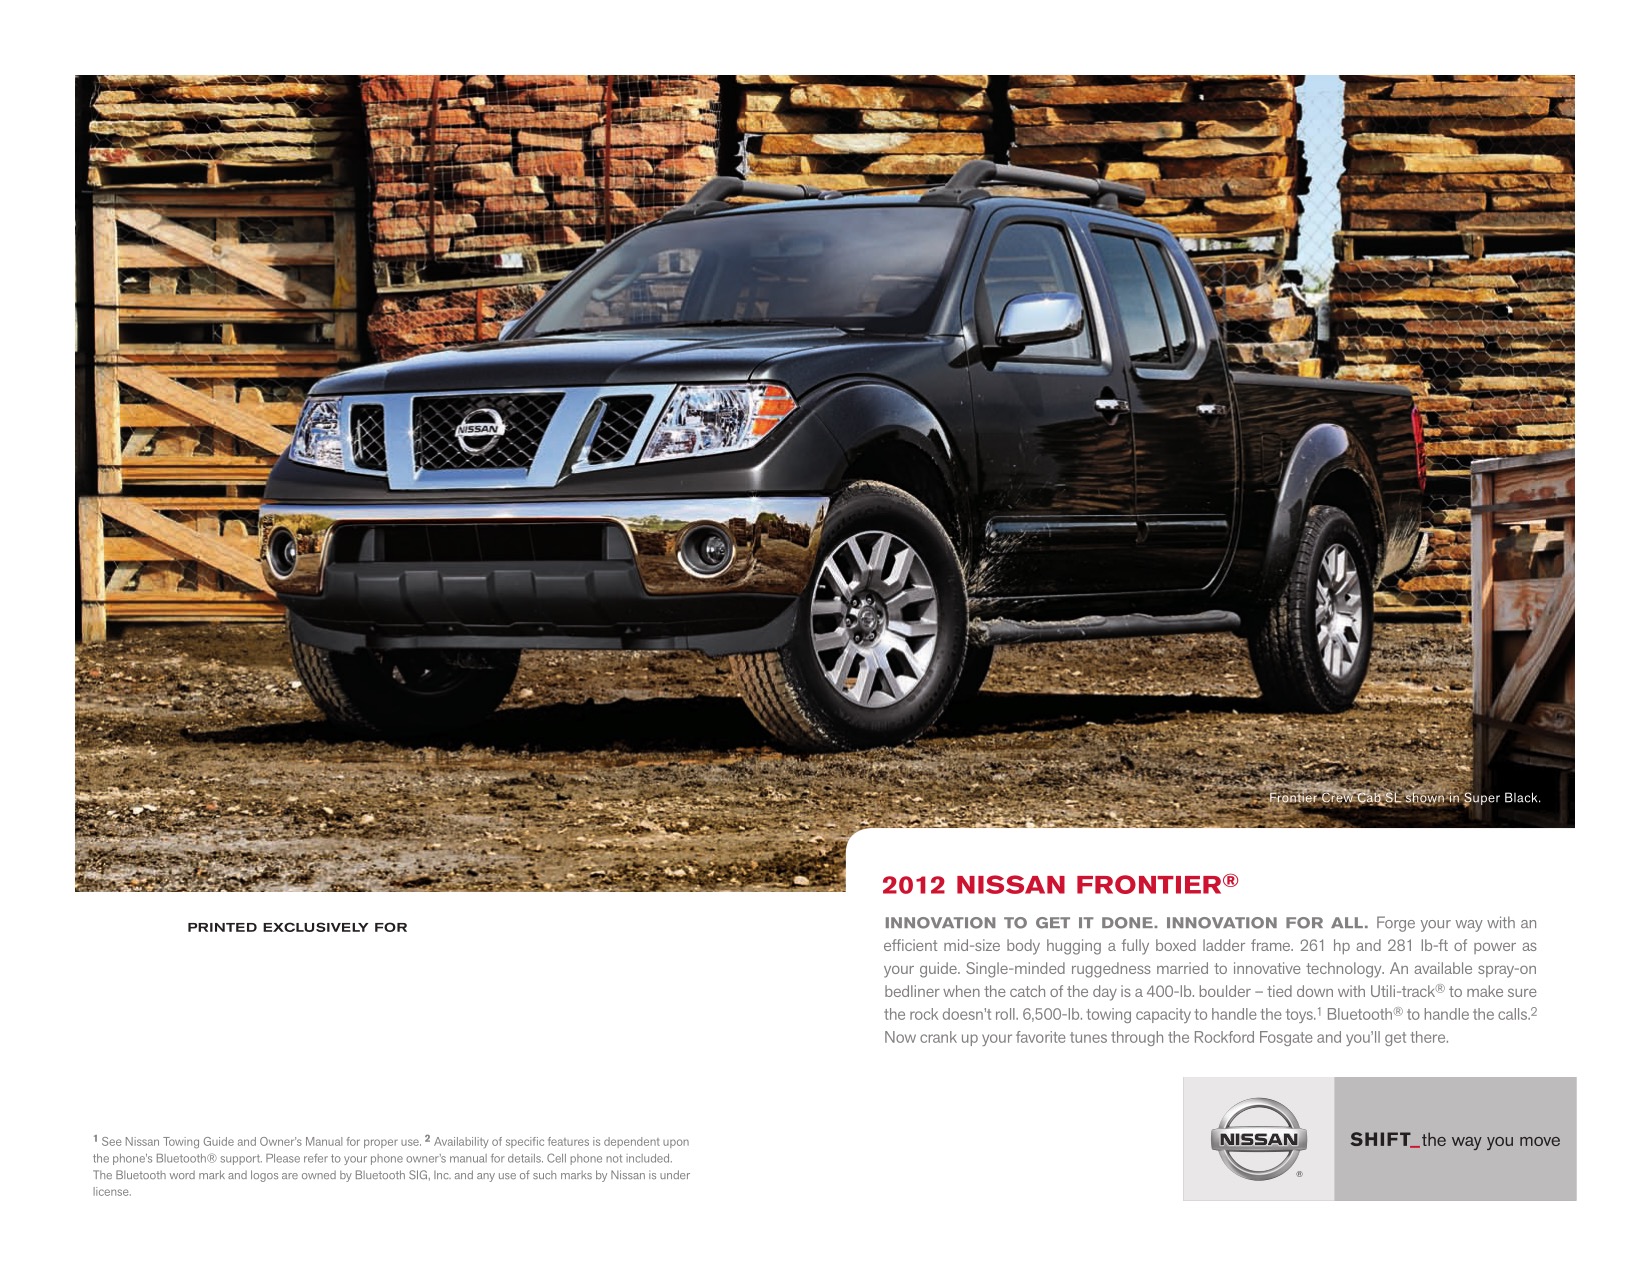 2012 Nissan Frontier Brochure Page 2